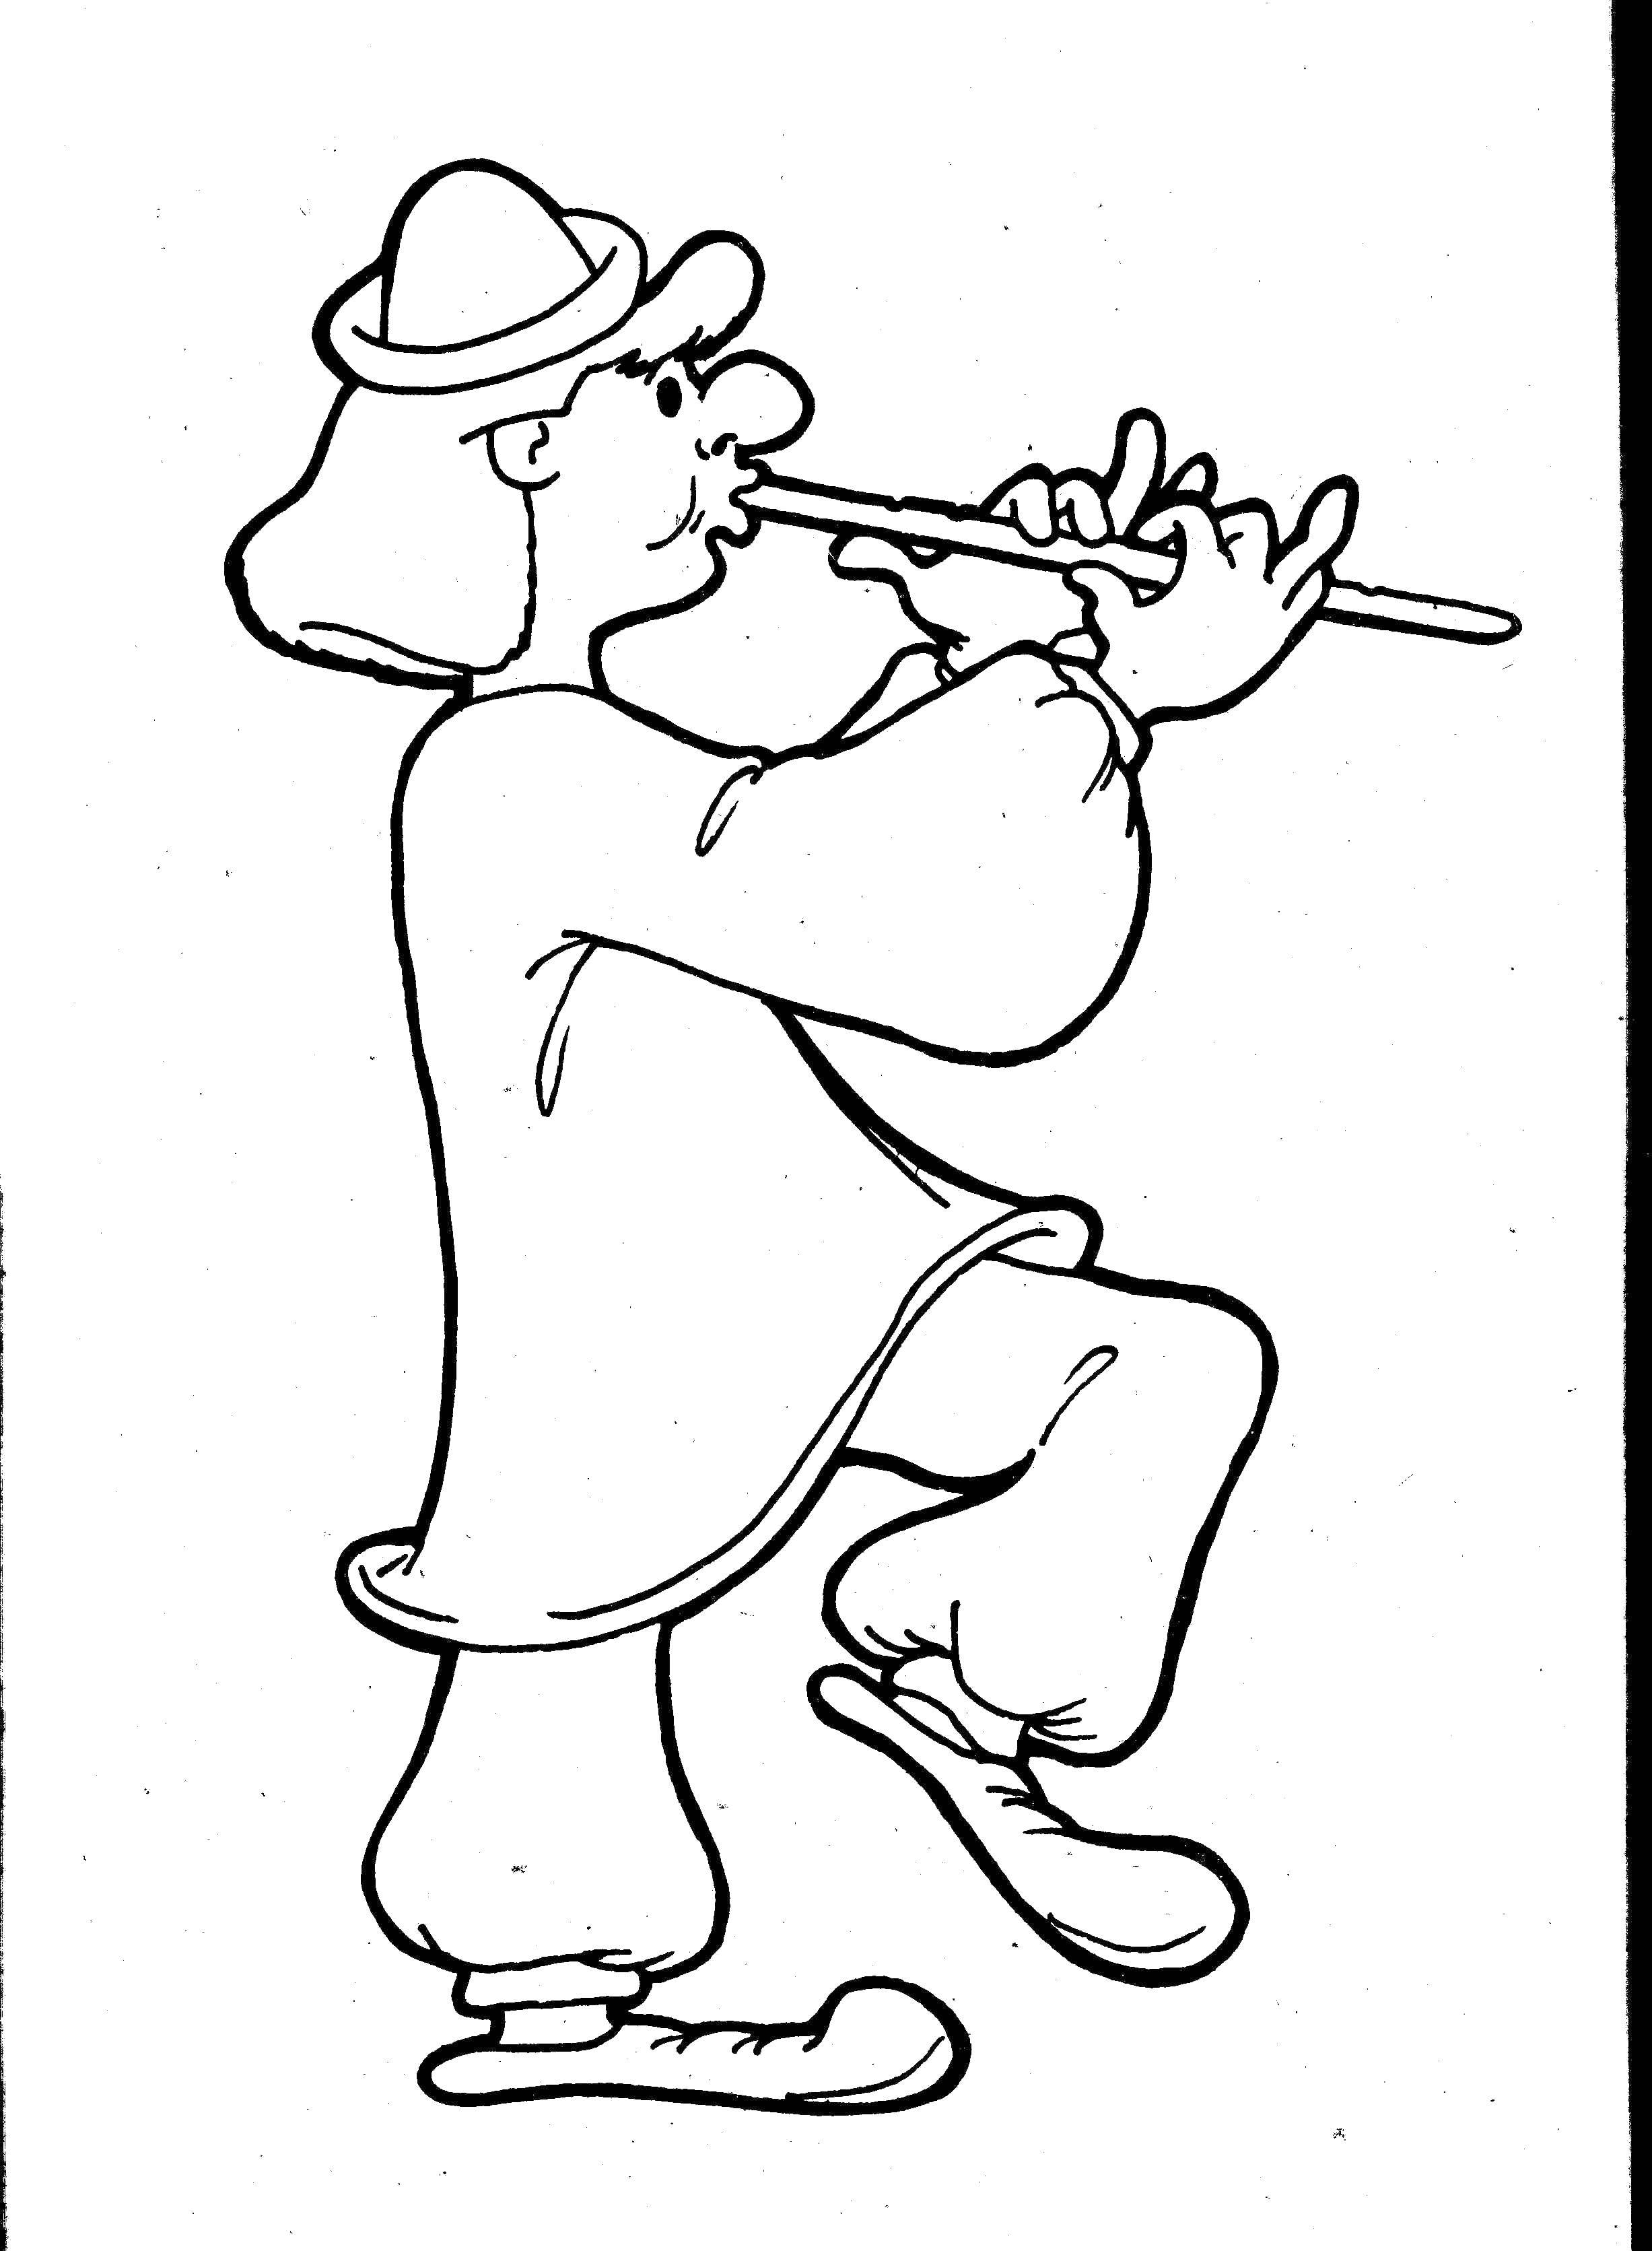 Coloring The guy playing the flute. Category Music. Tags:  flute, music.